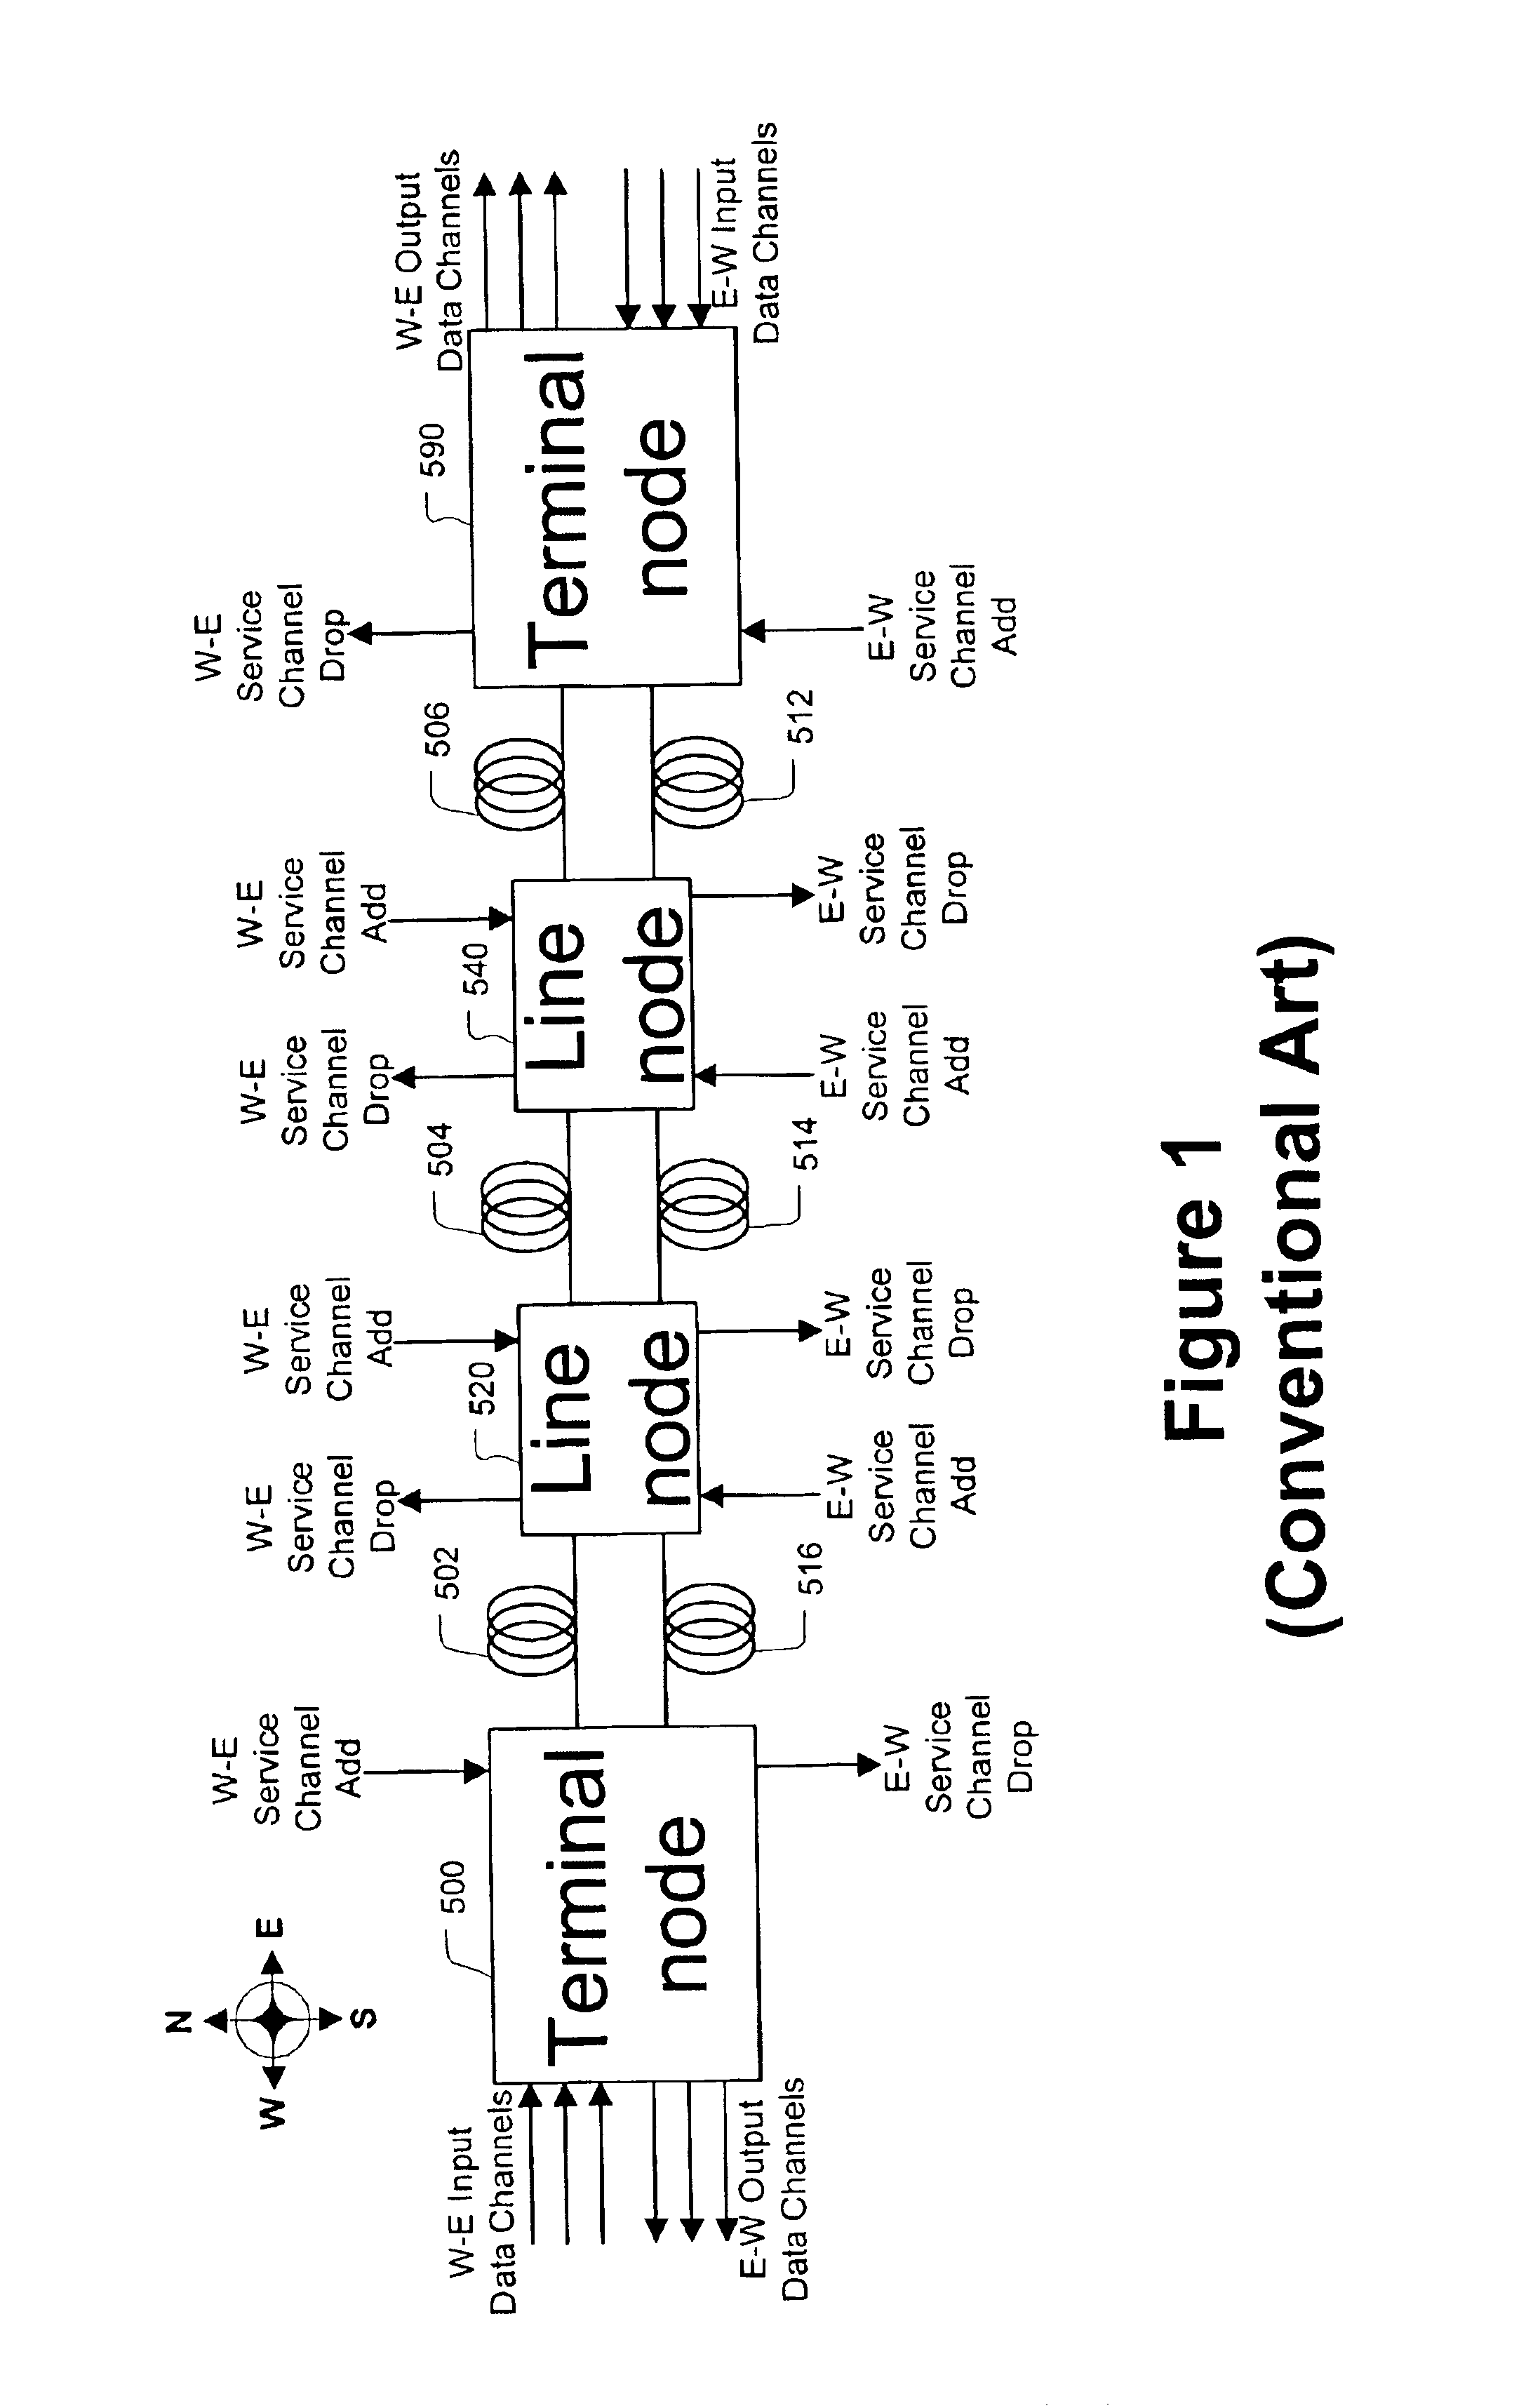 Optical supervisory channel apparatus and method for measuring optical properties